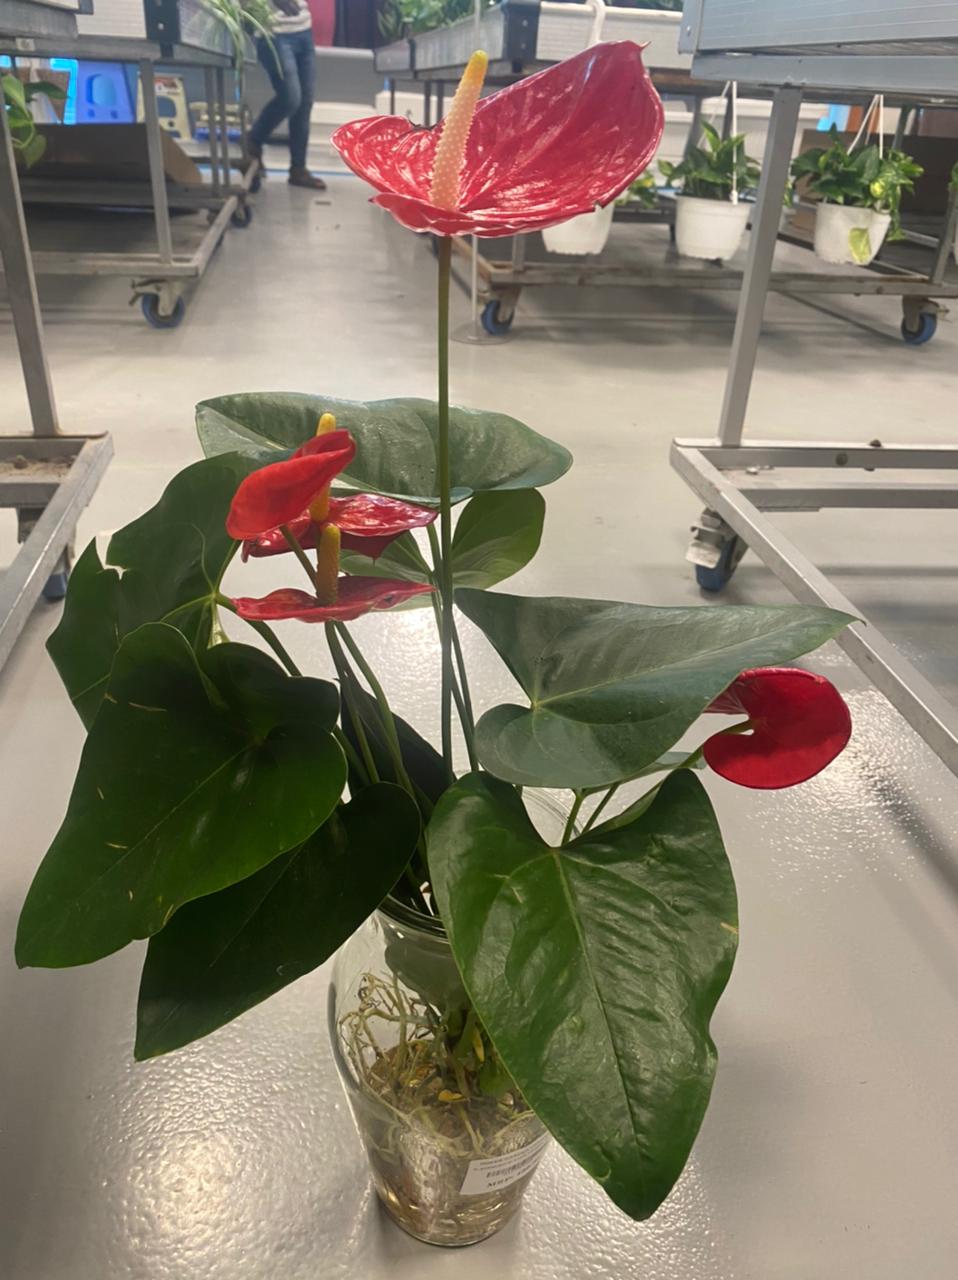 Growing Anthuriums in Water | Anthurium Plant Propagation